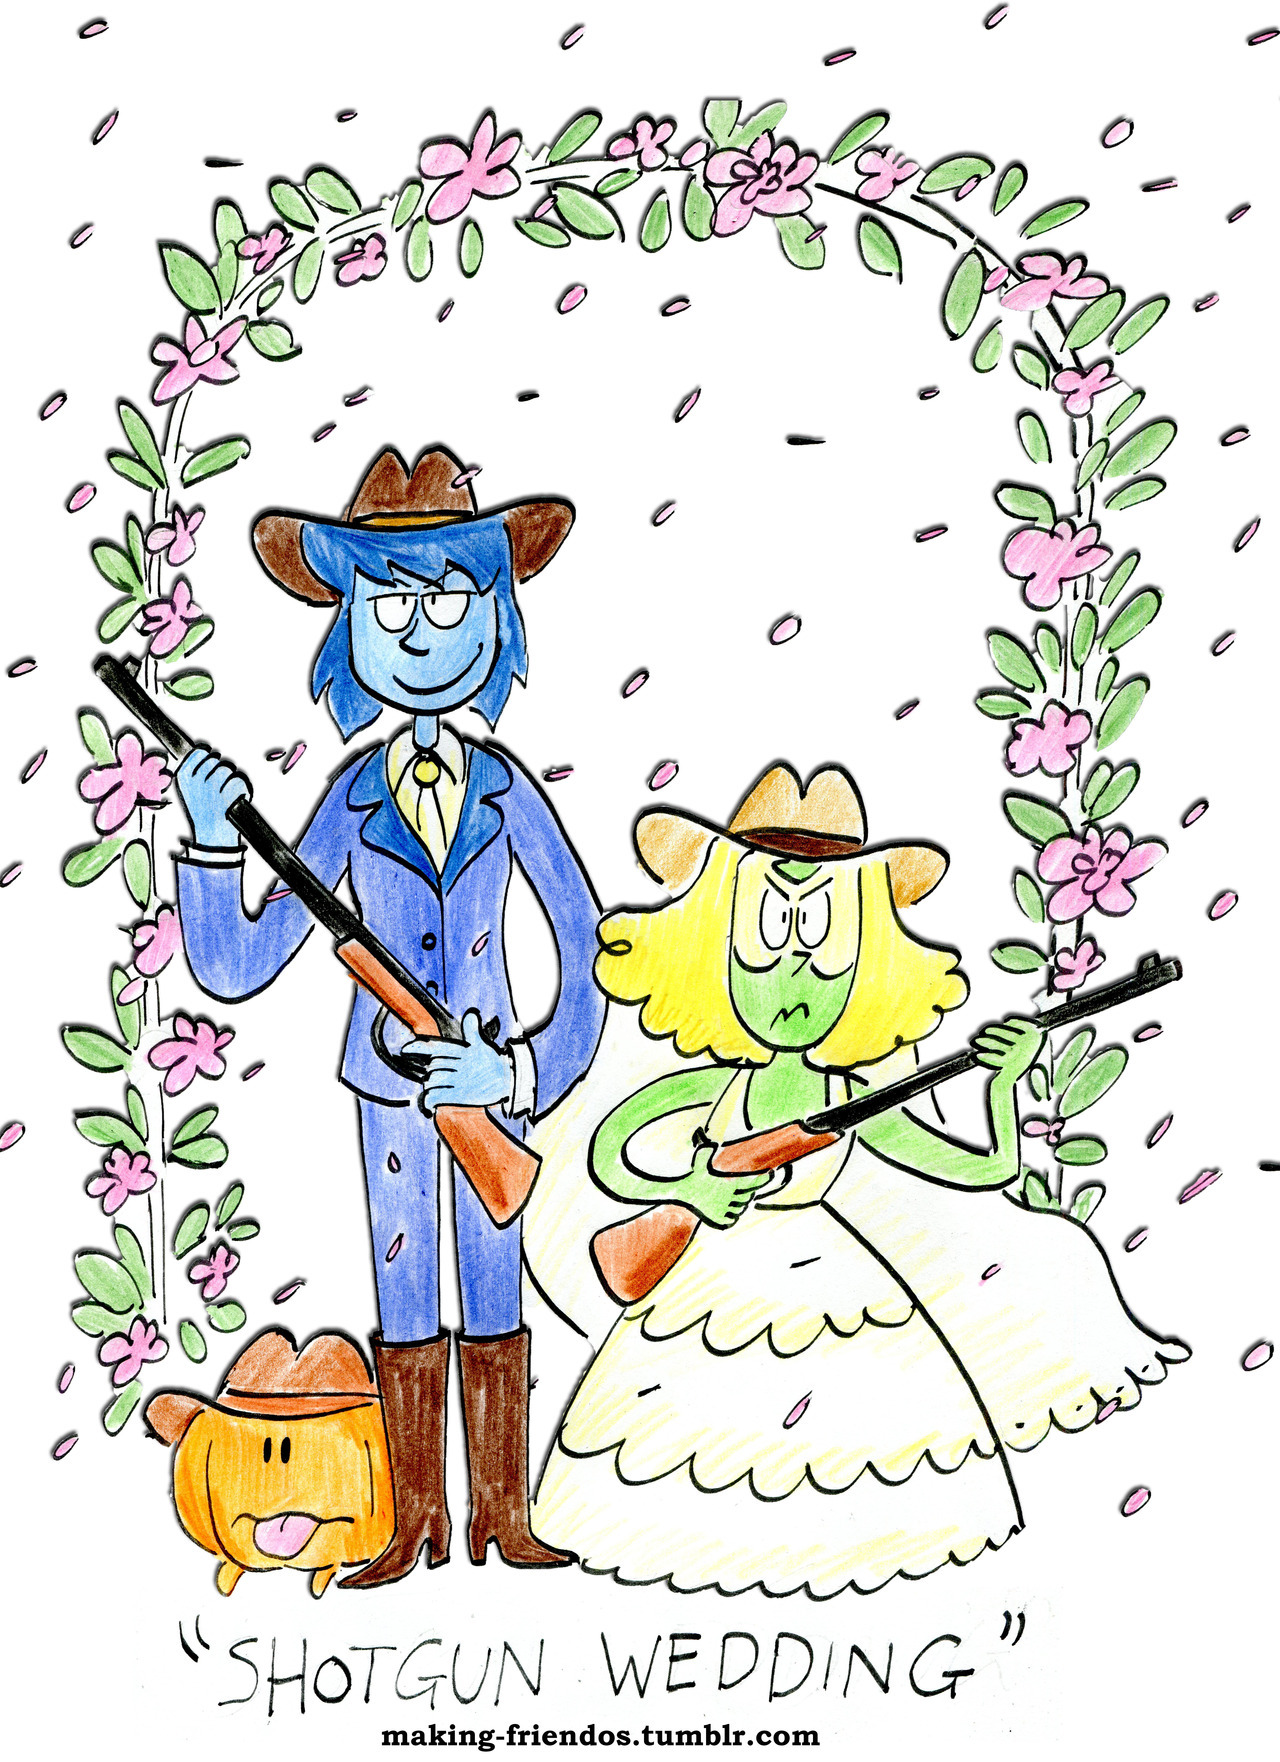 @moonstone-coral suggested a Lapidot redneck wedding. The last wedding they went to was a little traumatic, so there’s no way they’re going in unprepared.